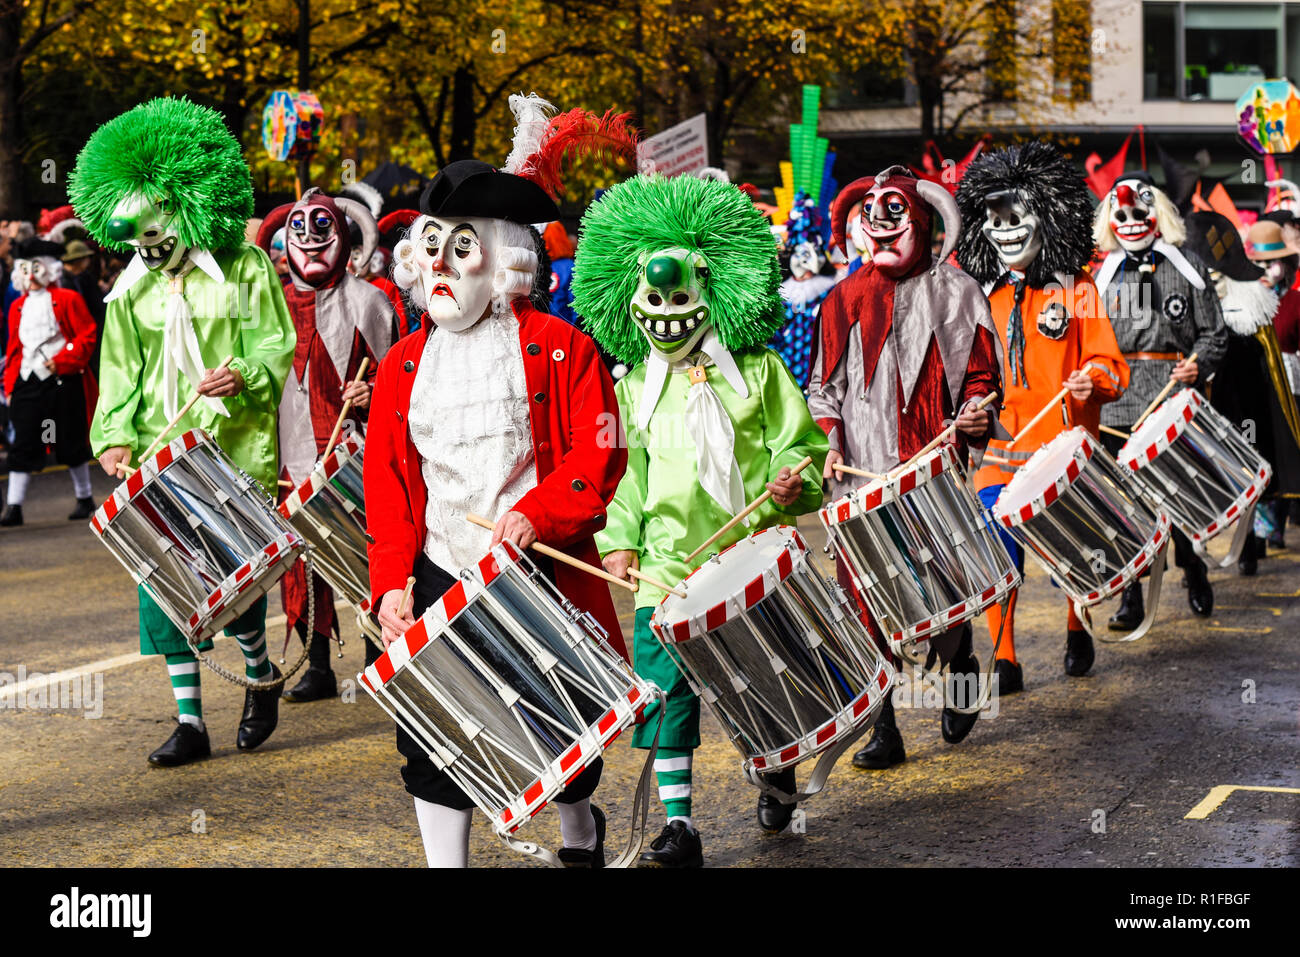 Rotstab Clique Liestal drummers at the Lord Mayor's Show Parade, London. From the Liestal Carnival, Baselland, Switzerland. Bizarre costumes Stock Photo